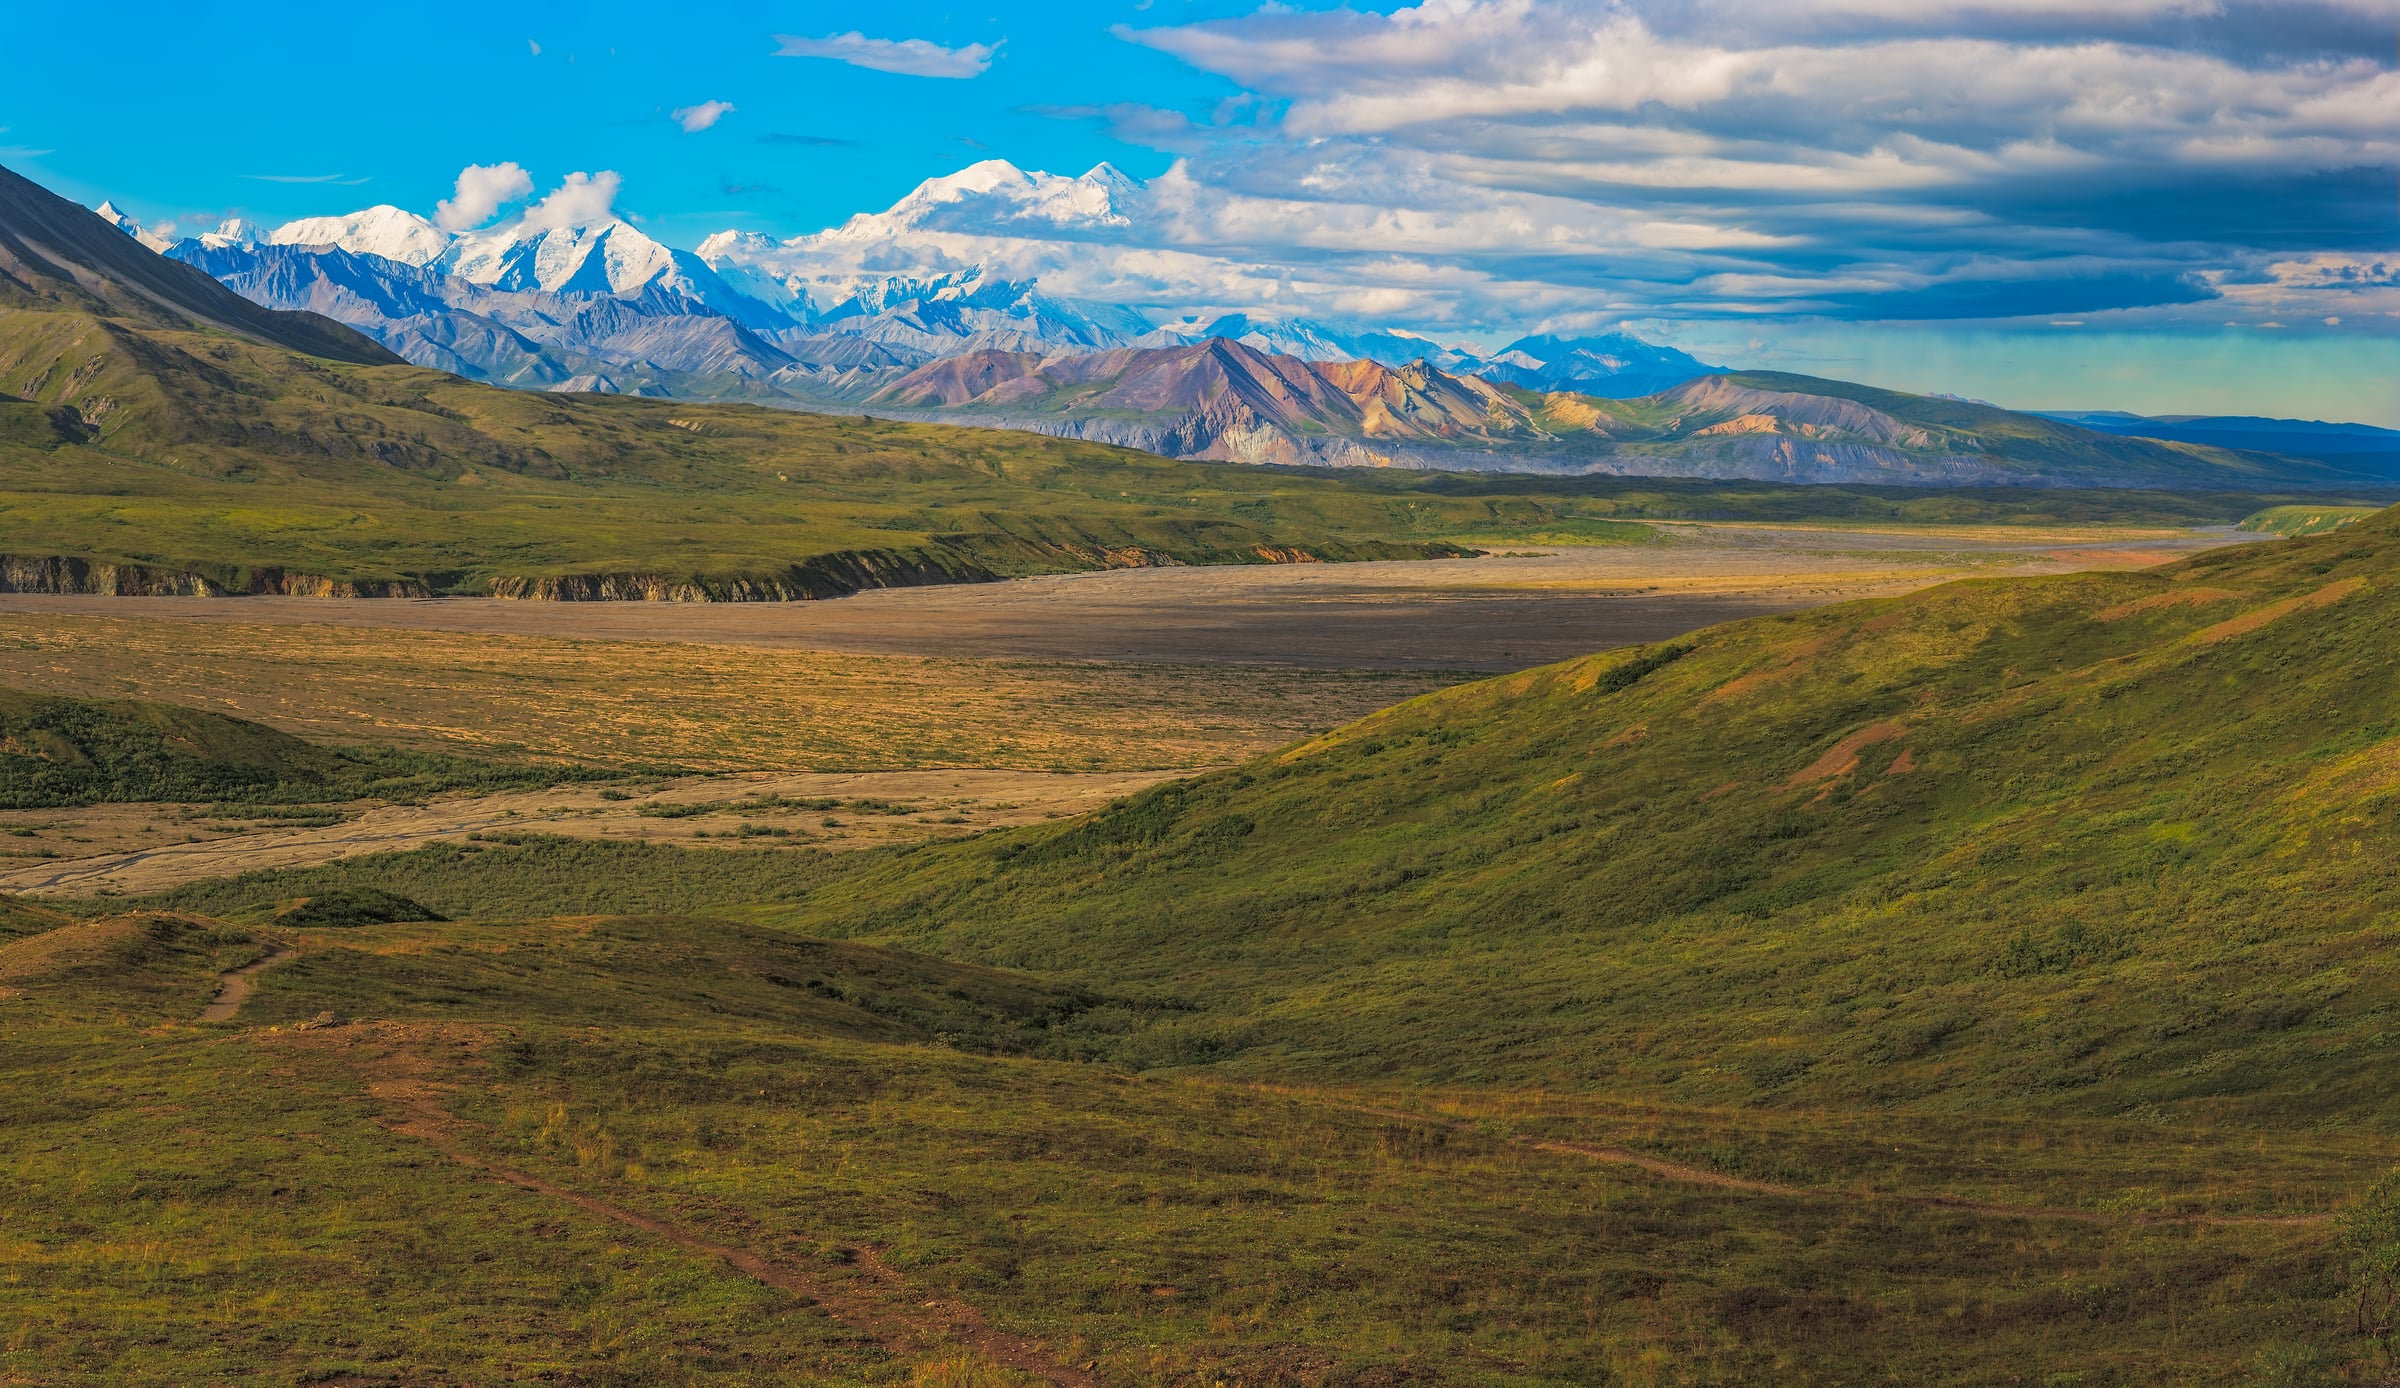 921 megapixels! A very high resolution, large-format VAST photo print of wilderness and mountains; landscape photograph created by John Freeman in Denali National Park, Alaska